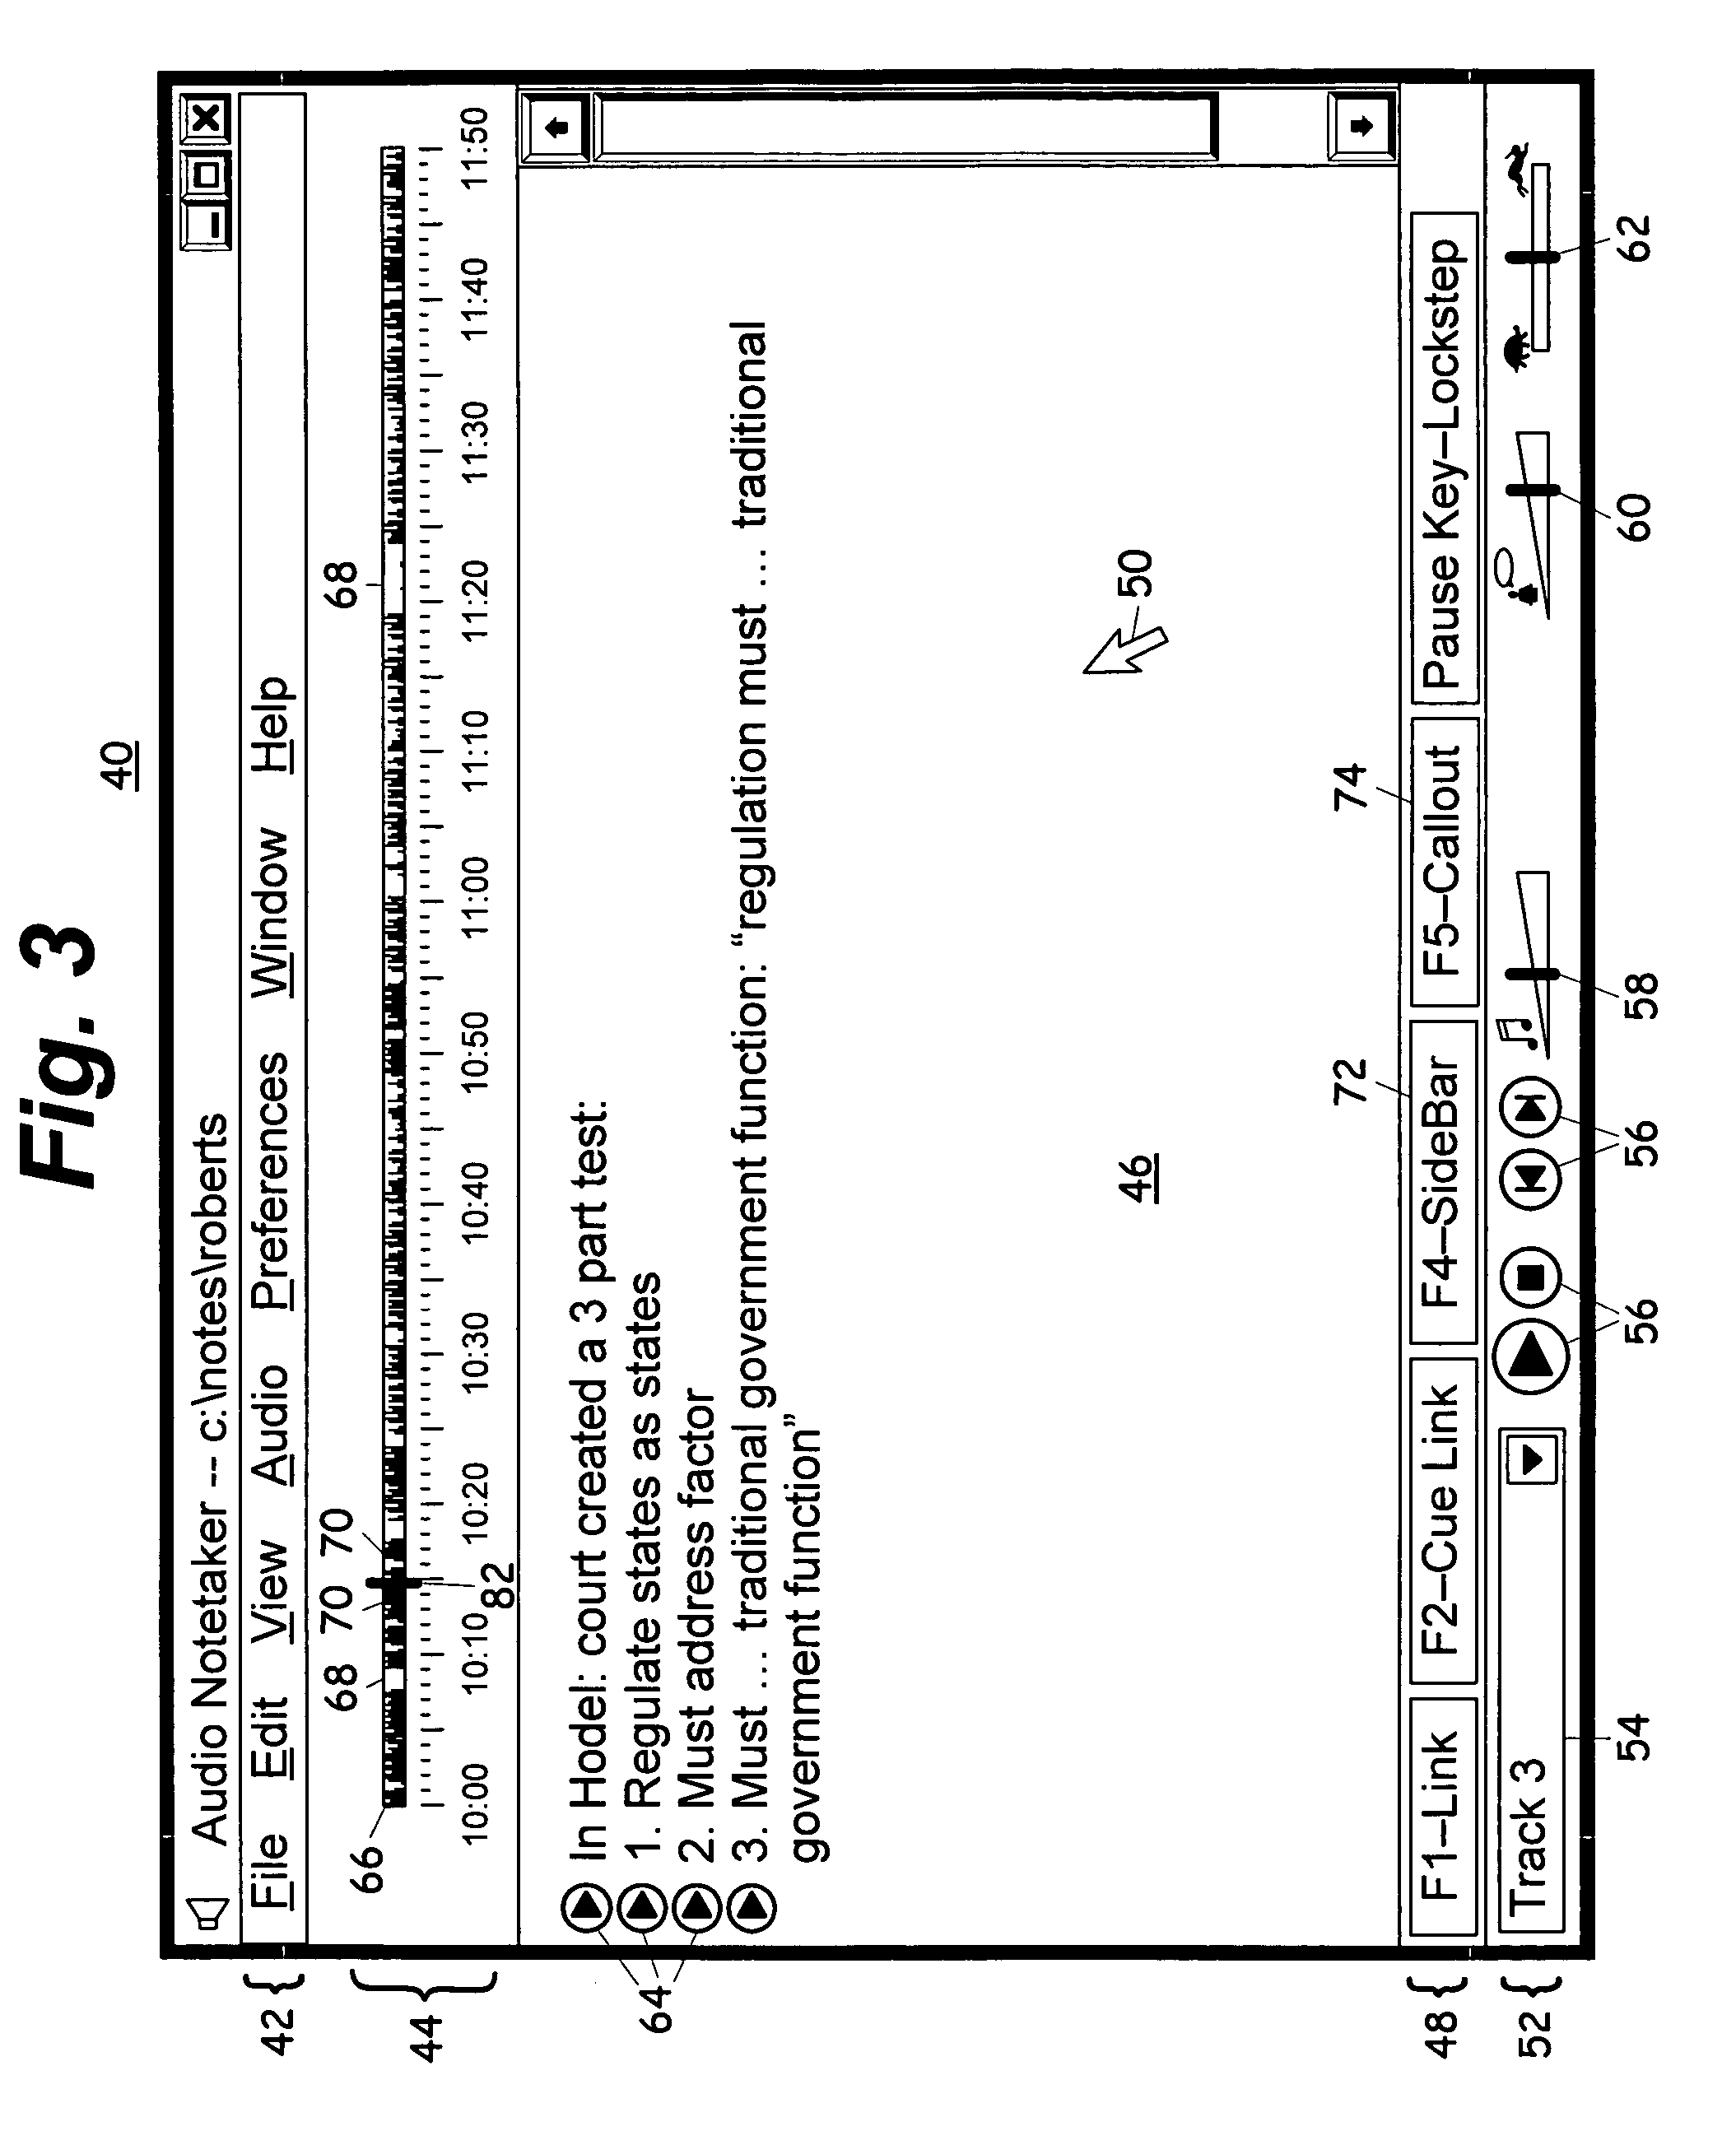 Computerized notetaking system and method